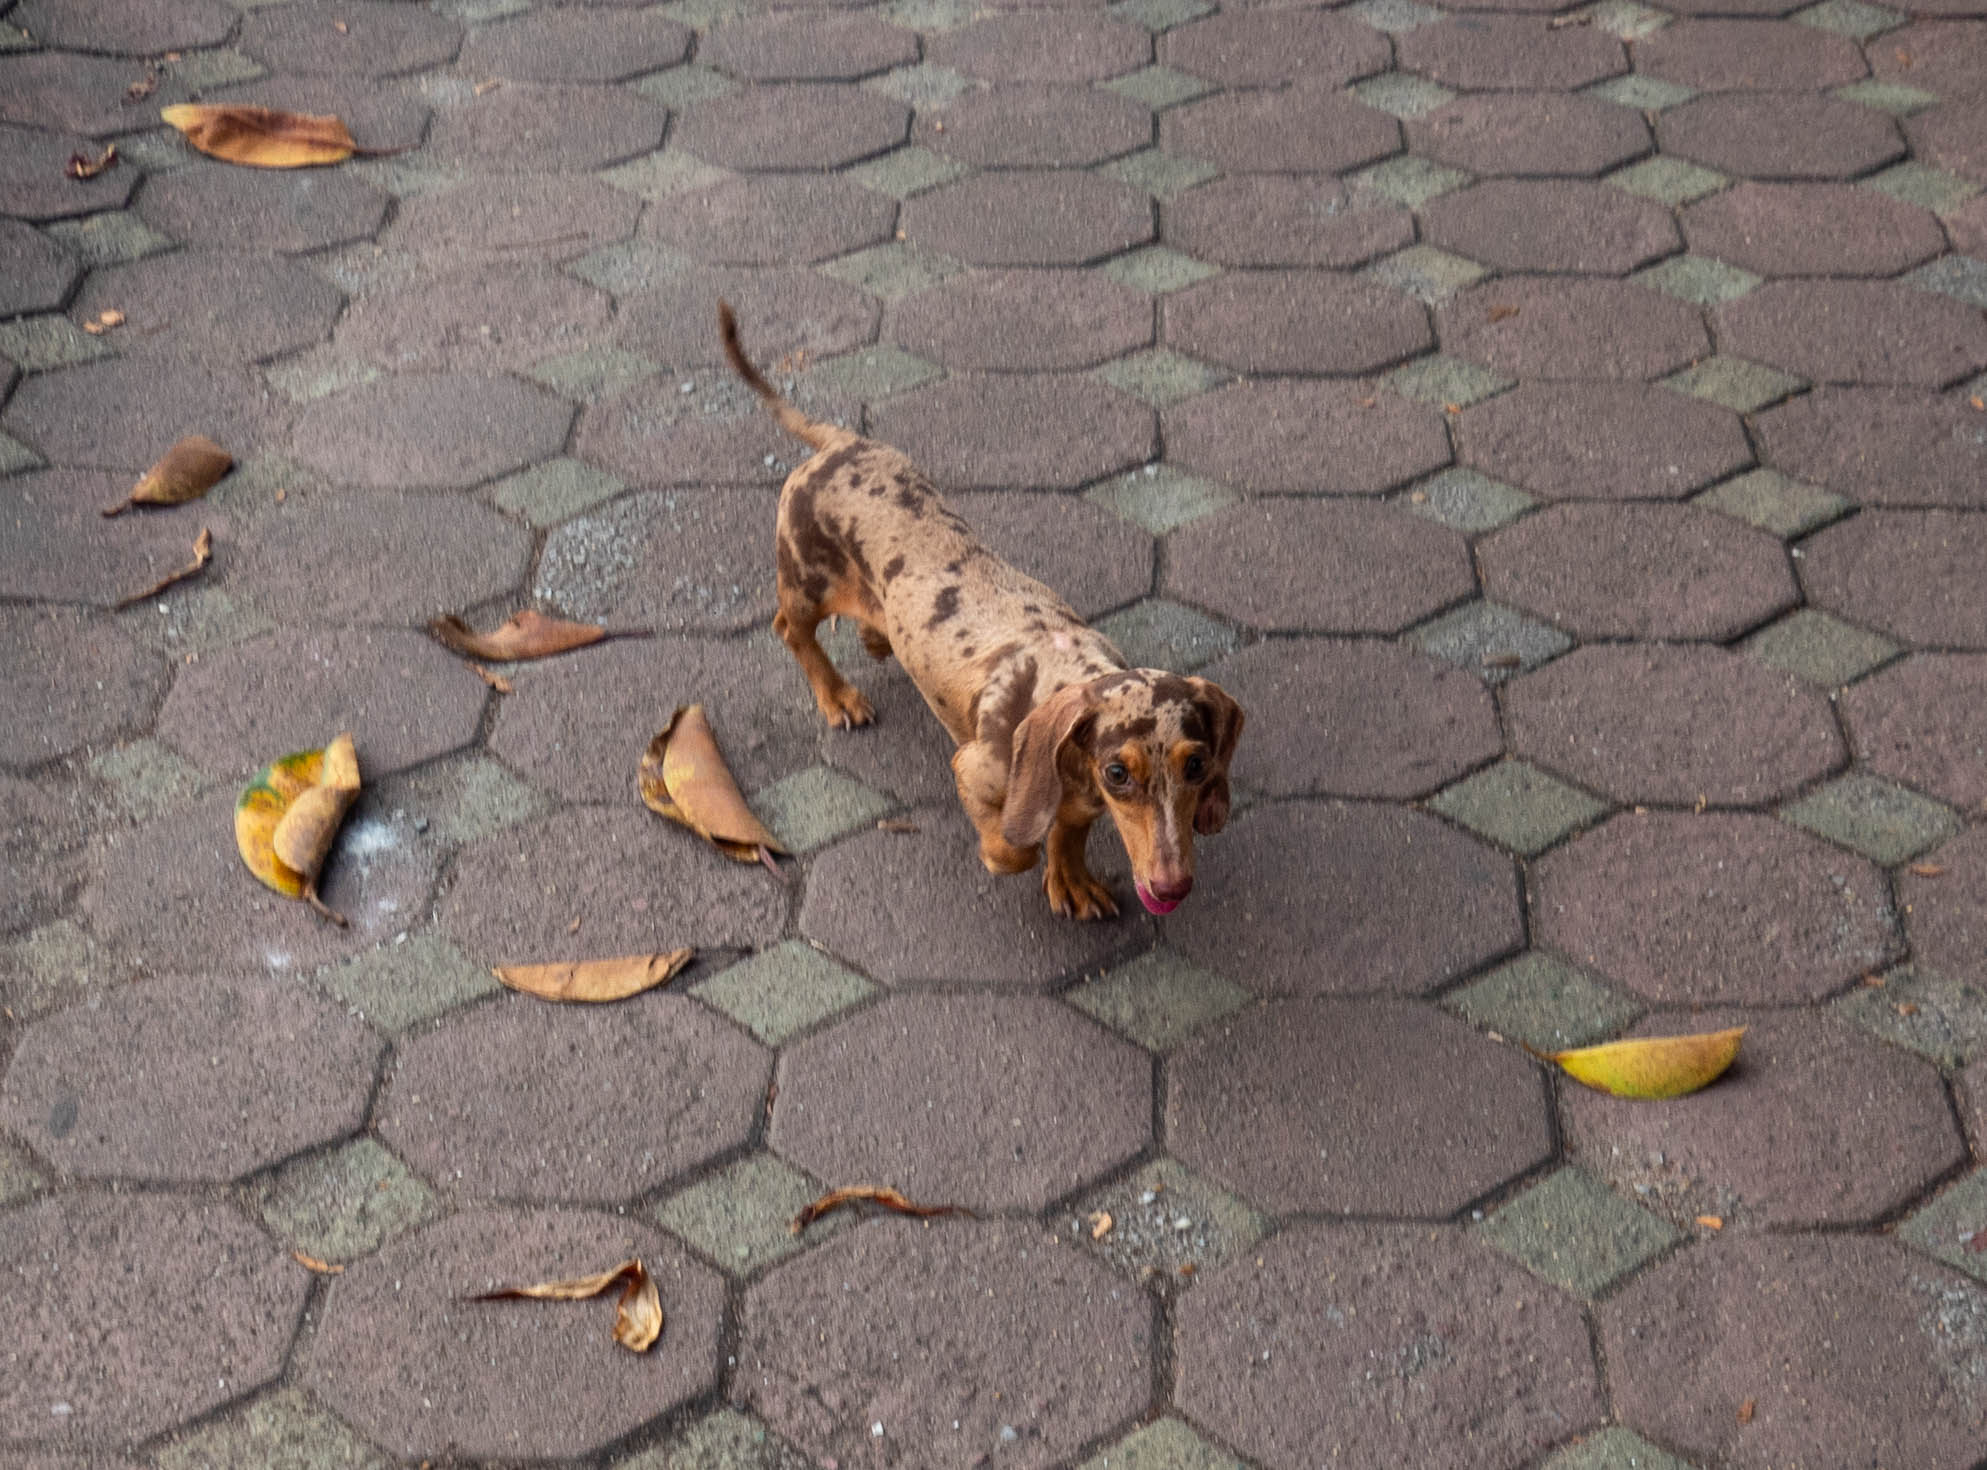 Picture of brown and tan spotted dachshund next to brown leaves.